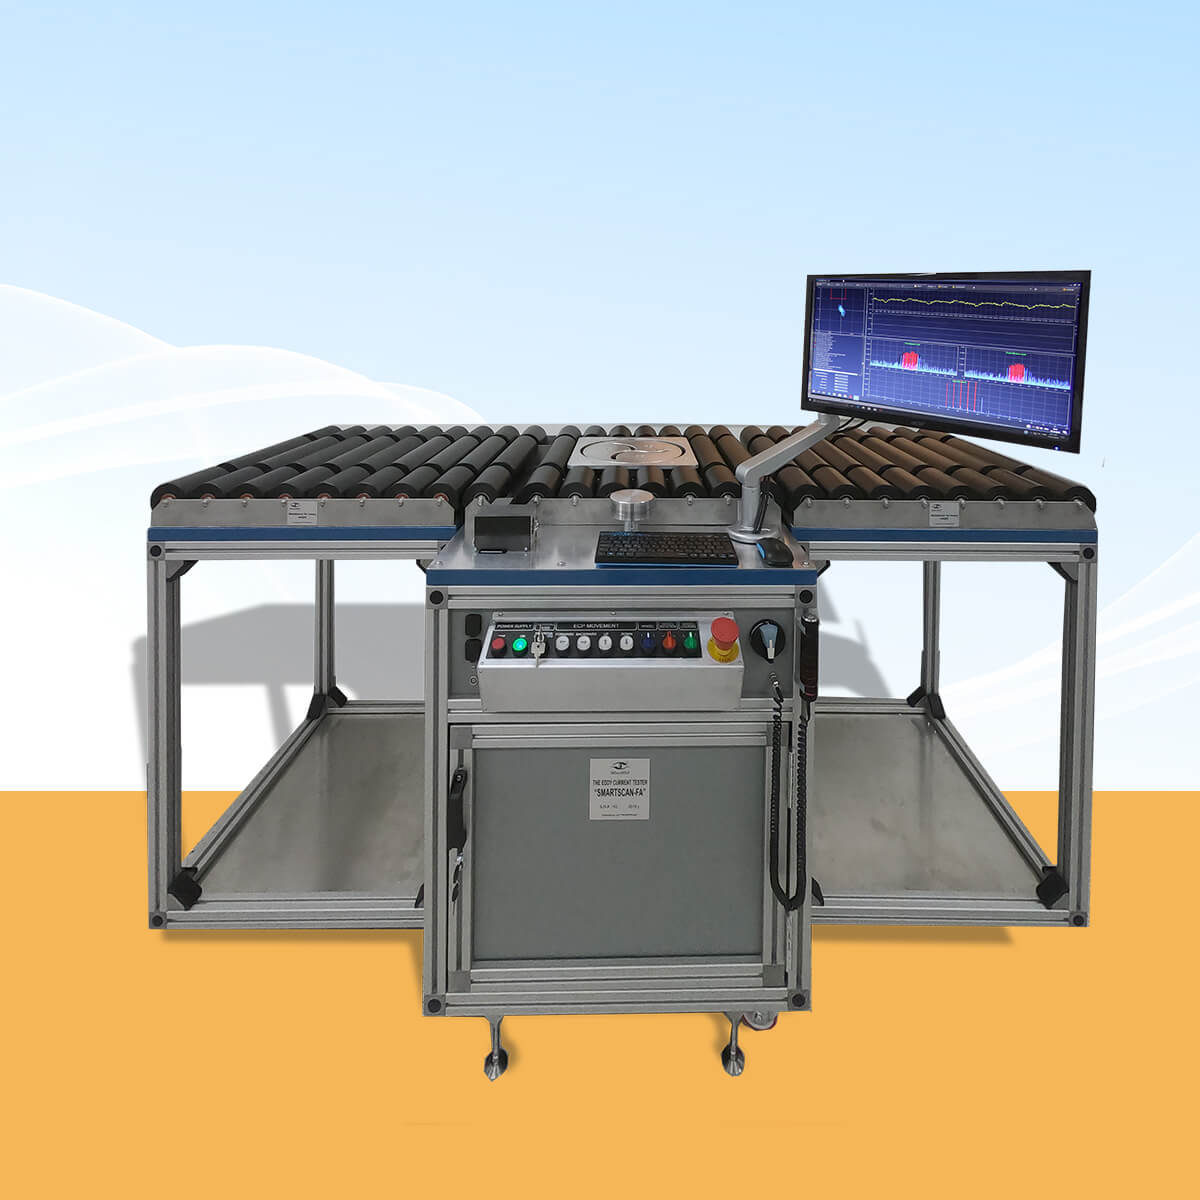 Aircraft wheel inspection system SmartScan with an enlarged table